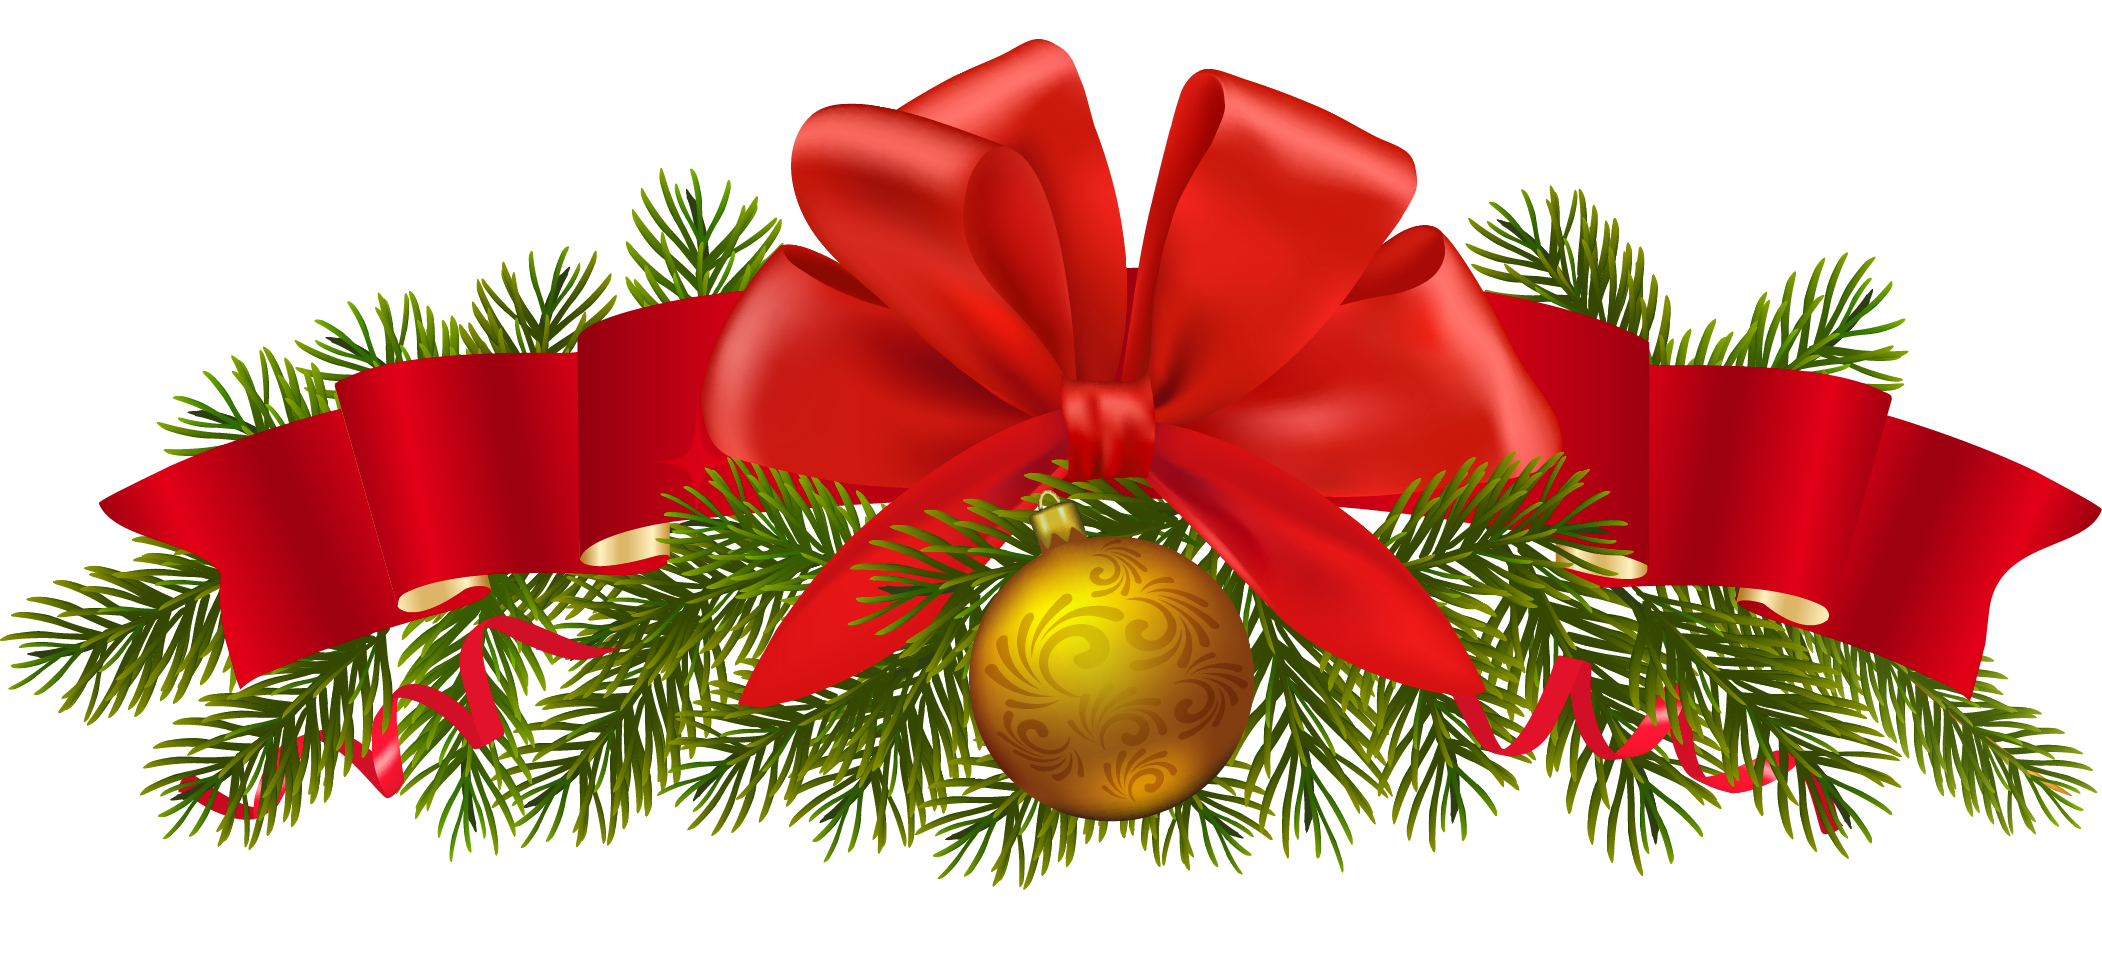 Christmas Decorations Images  - Christmas Decorations Clipart